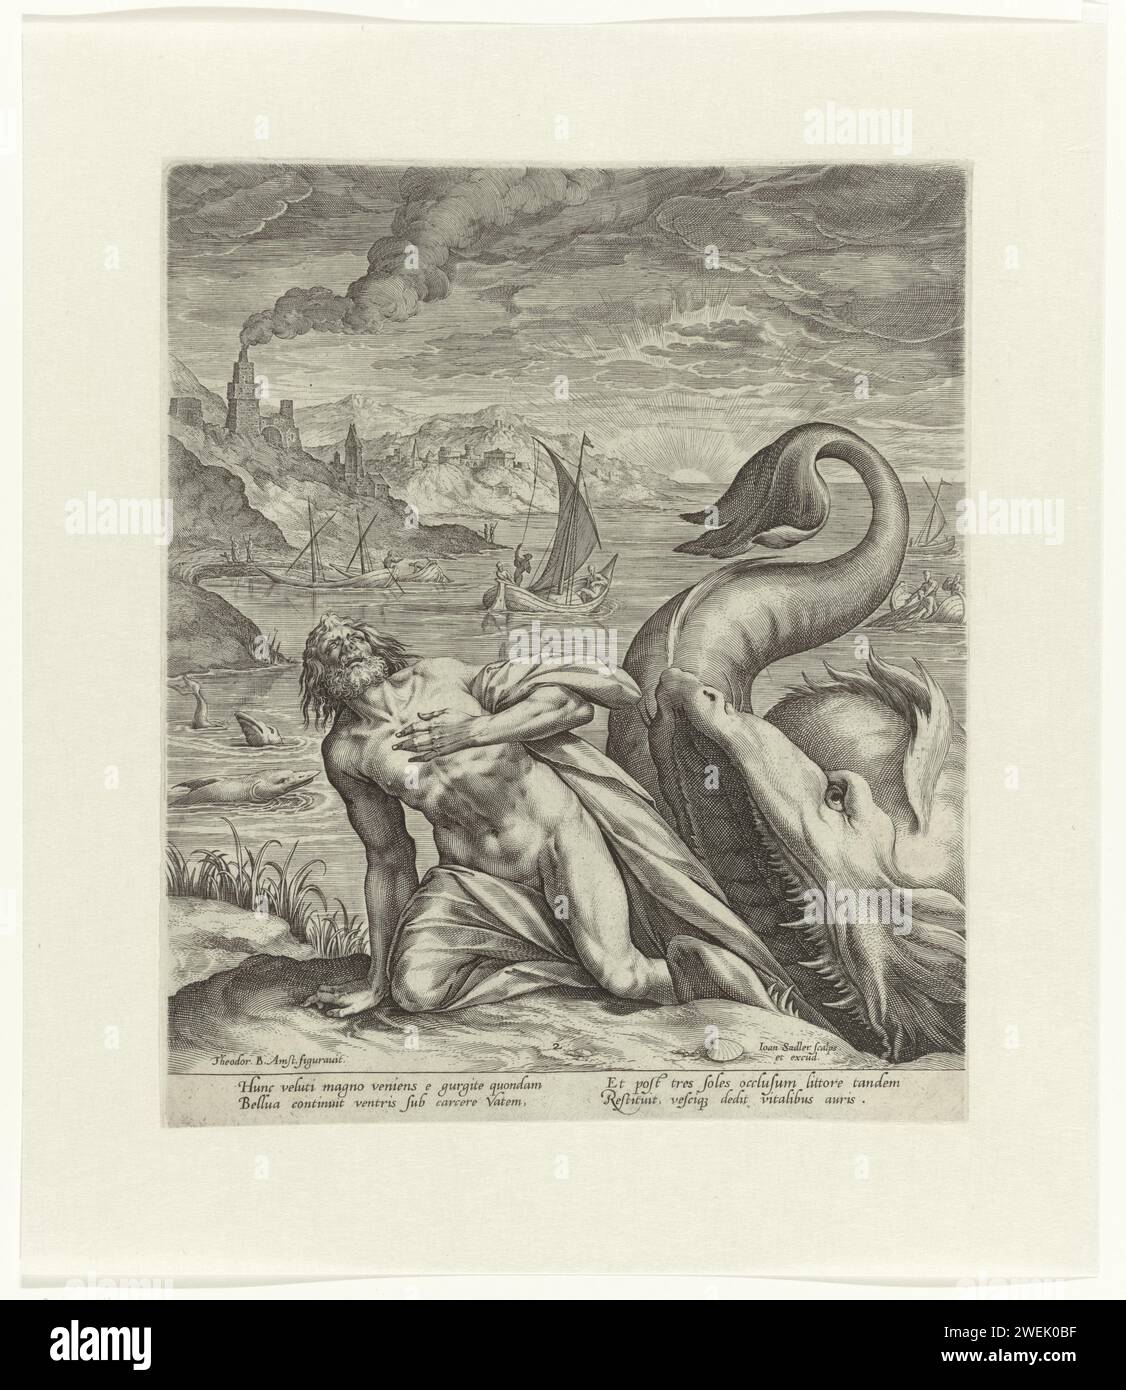 Jonah spit out by whale, Johann Sadeler (I), After Dirck Barendsz., C. 1582 - Before 1600 print Jonah is spit out by whale and crawls ashore. Fishing boats in the background. Numbered in the middle: 2.  paper engraving Jonah is swallowed by a great fish, (sea)monster, whale, dolphin, or the like Stock Photo